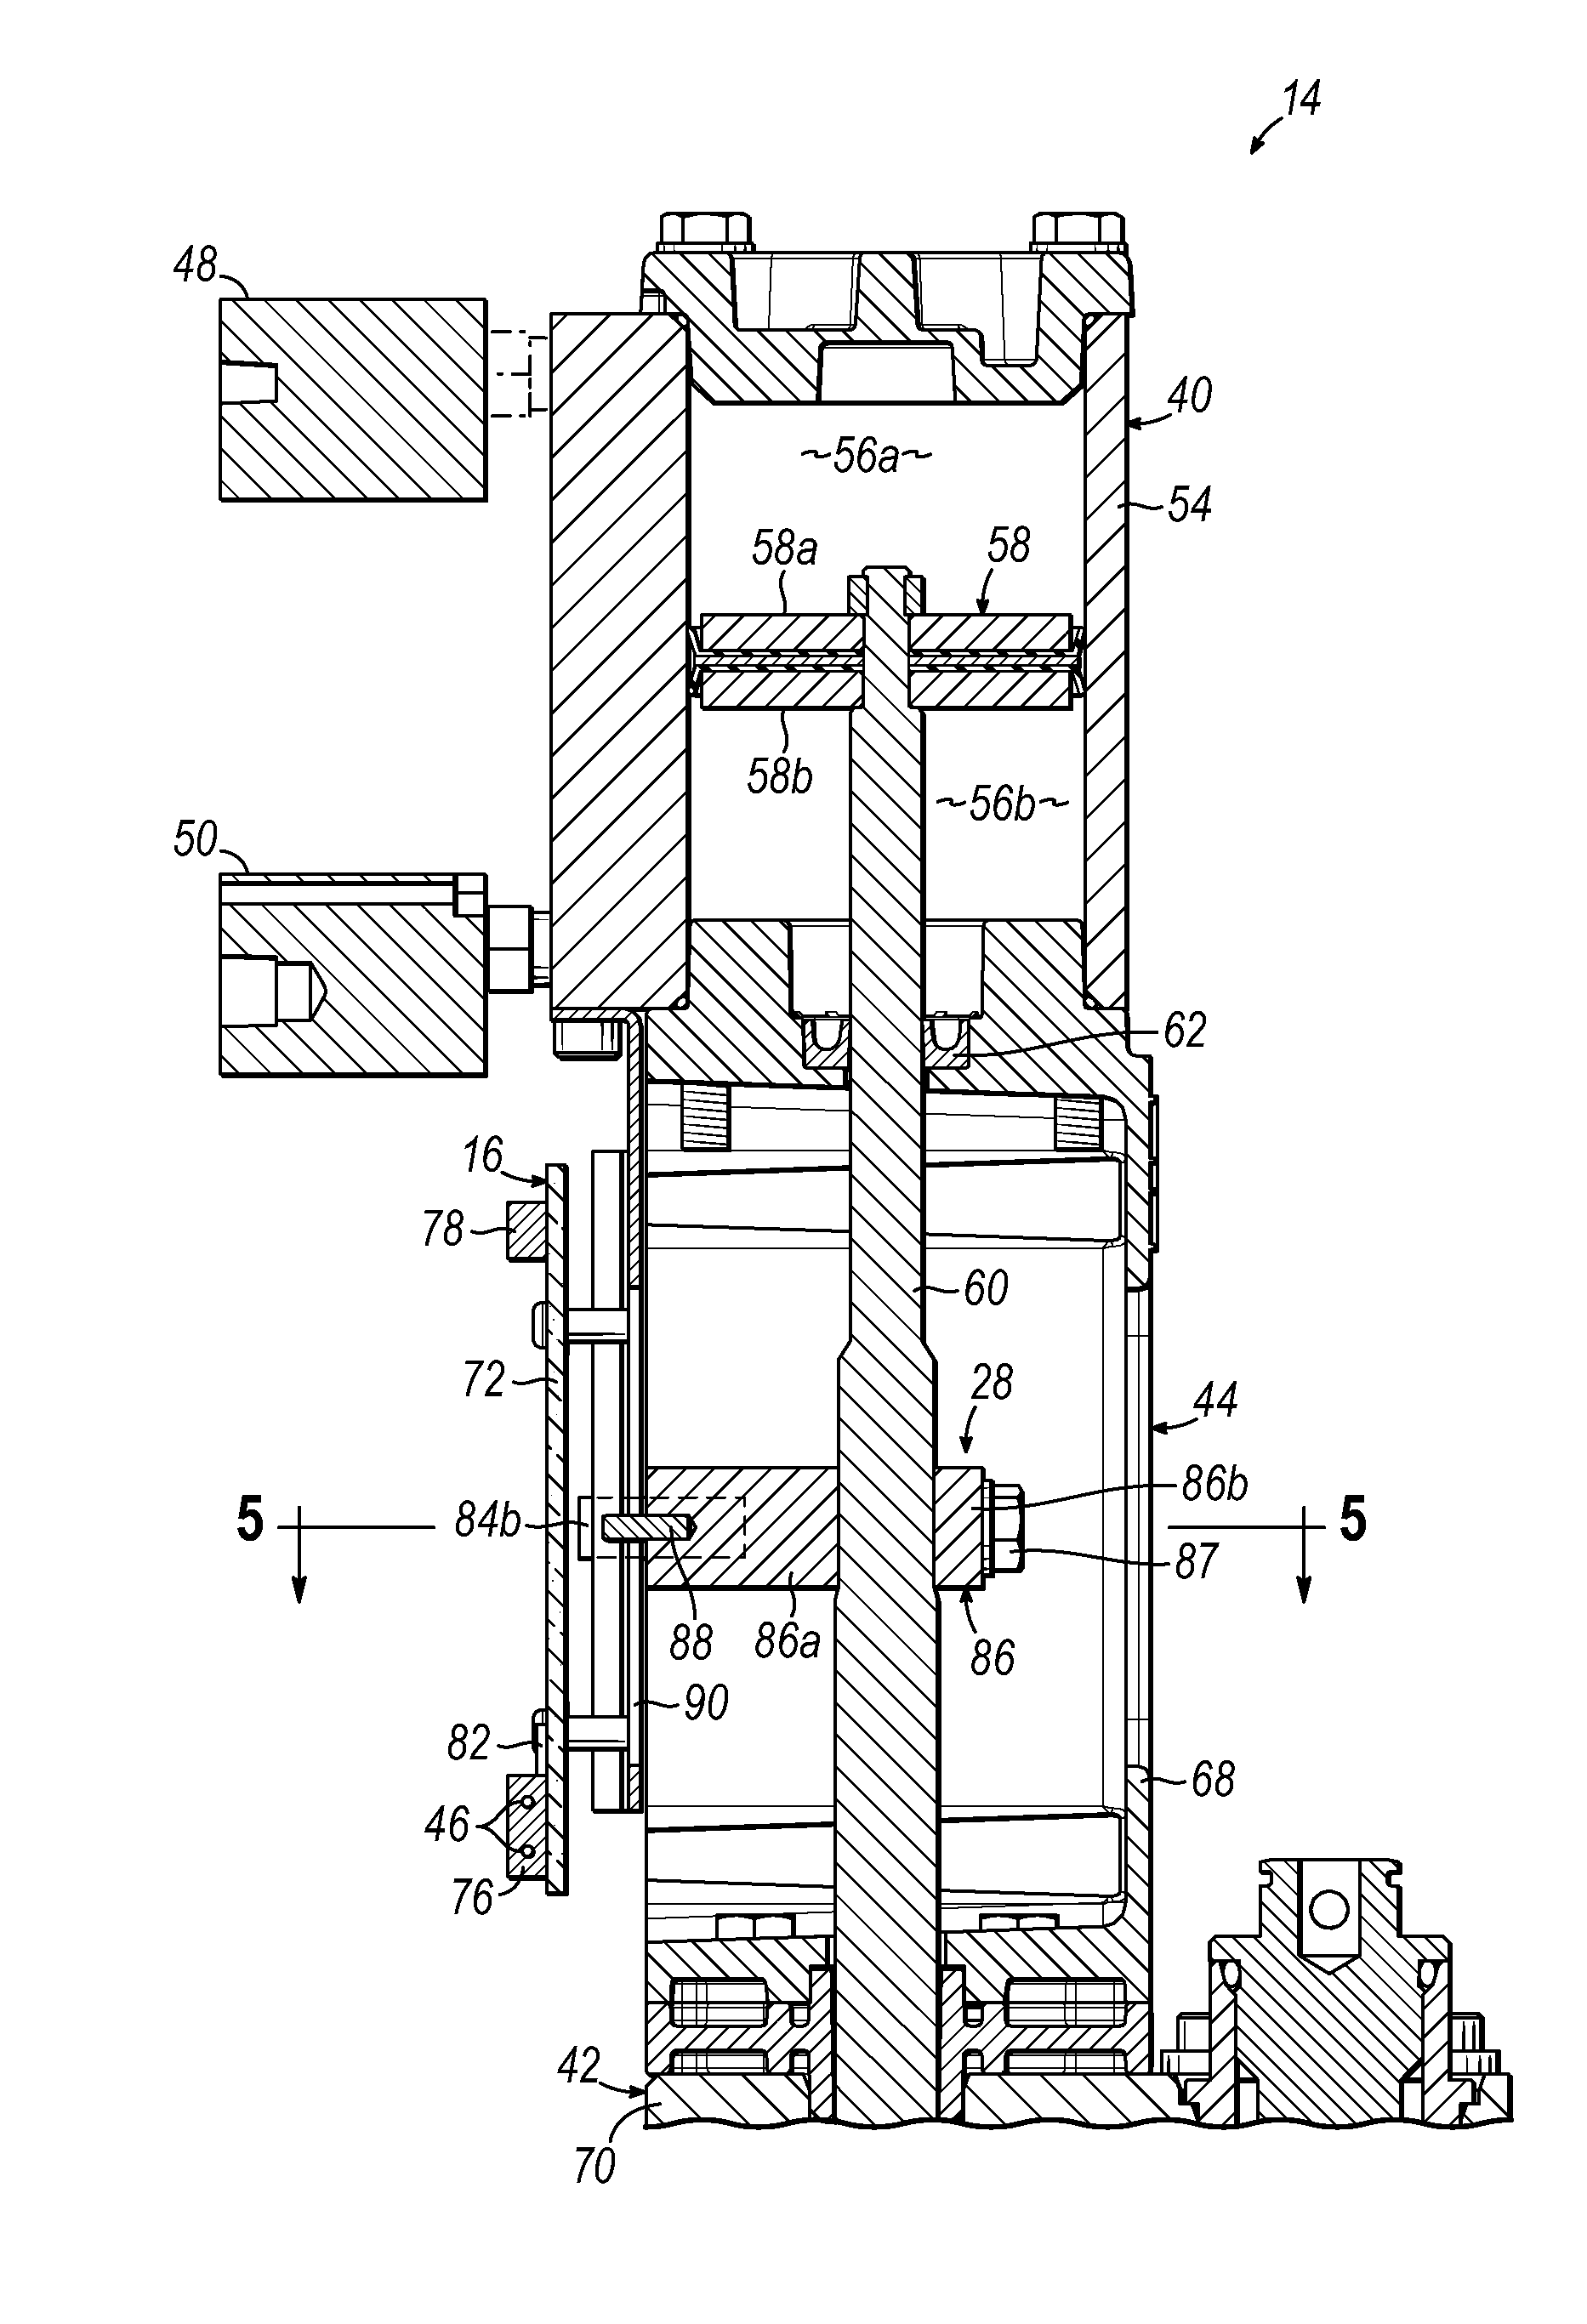 Adhesive dispensing system and method including a pump with integrated diagnostics